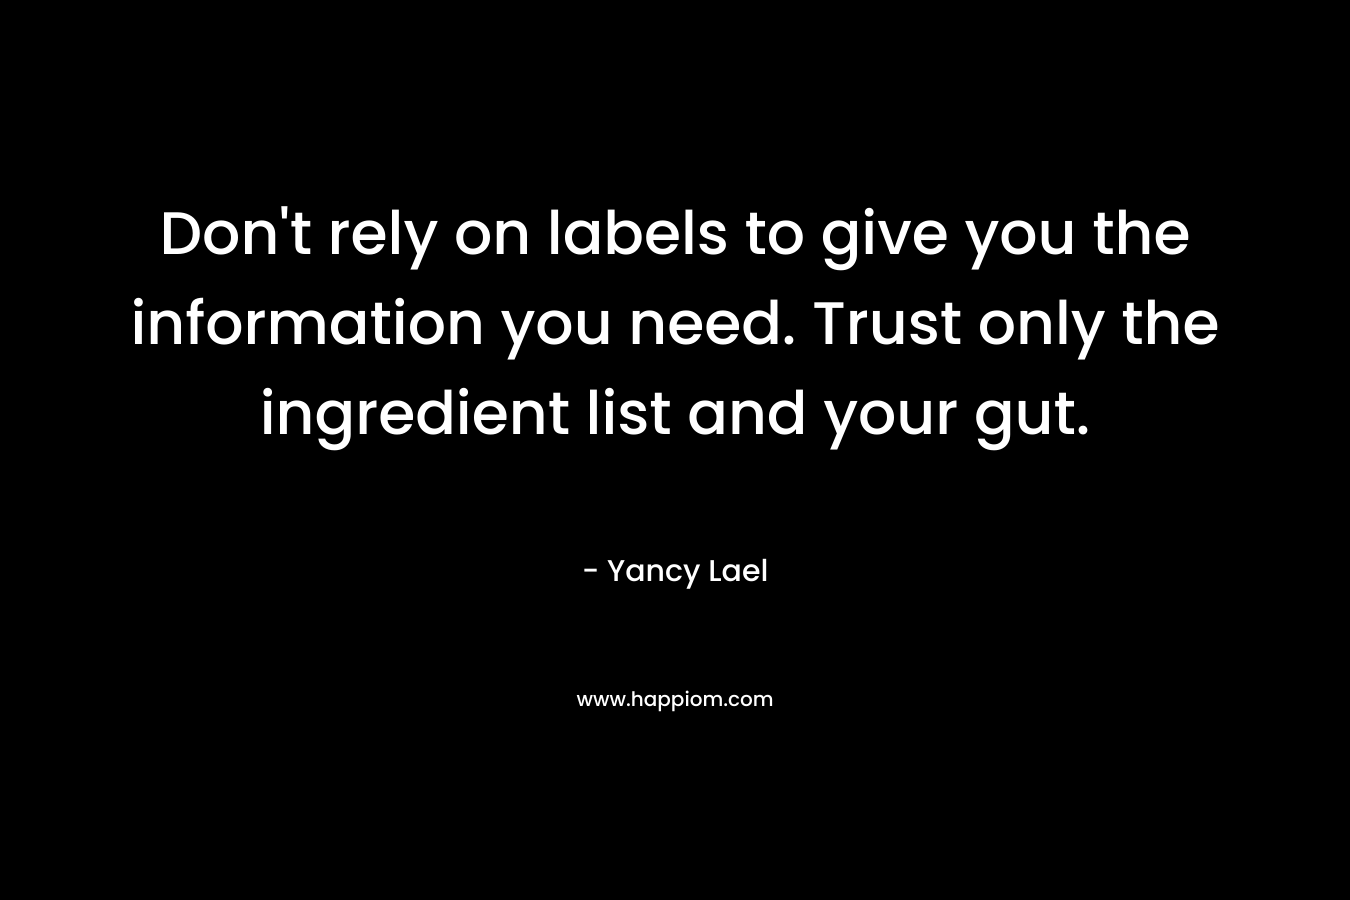 Don't rely on labels to give you the information you need. Trust only the ingredient list and your gut.